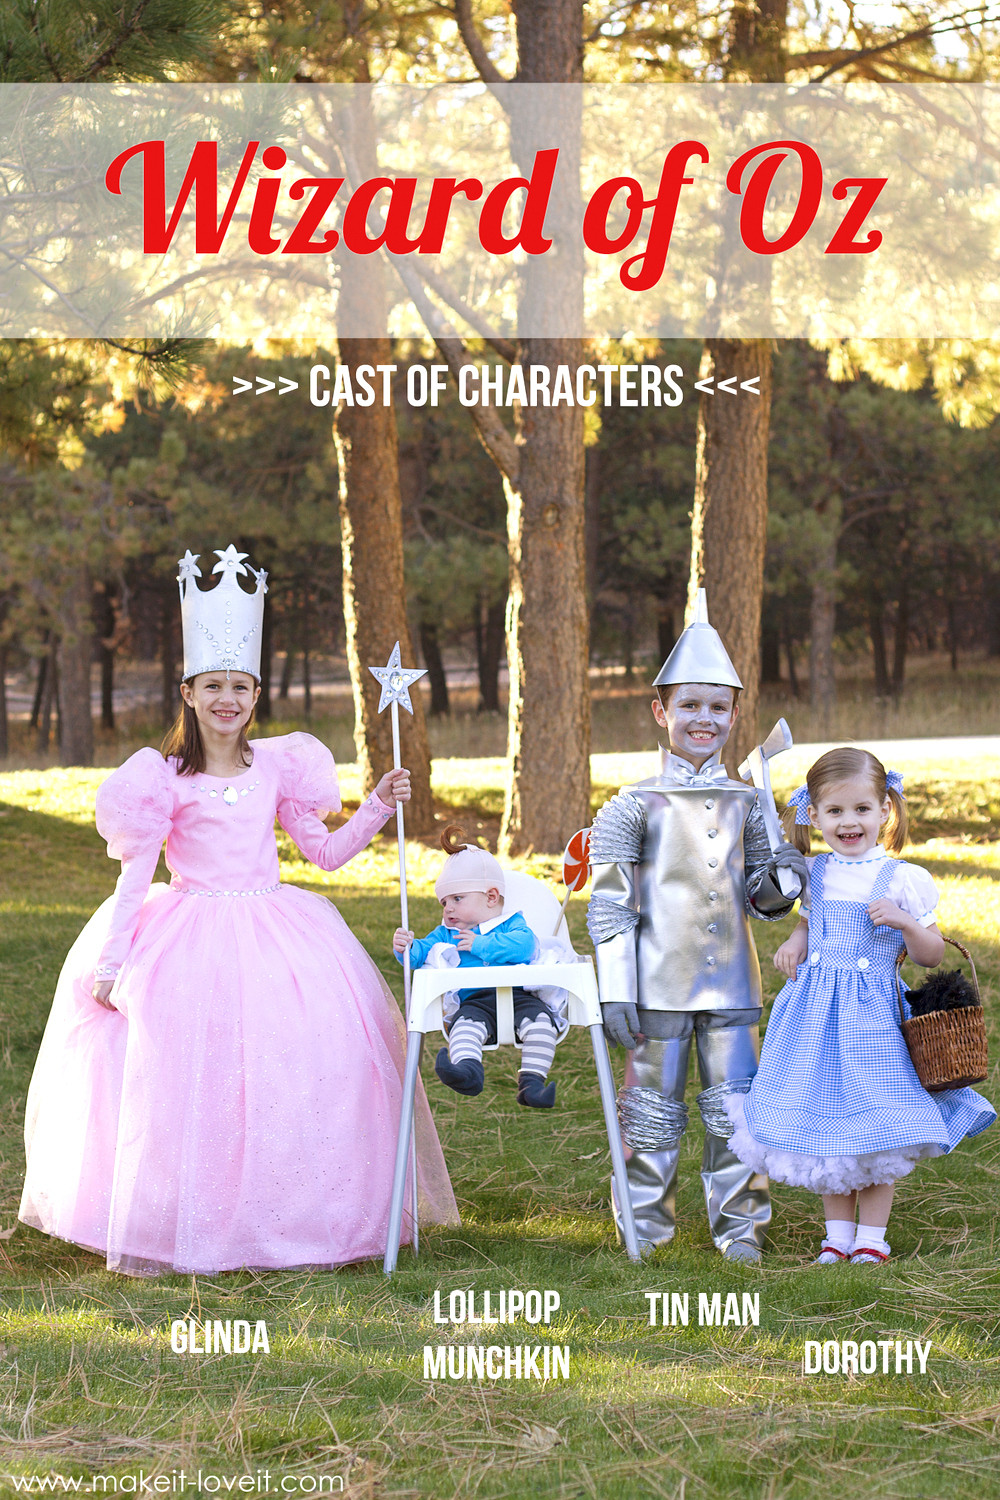 DIY Wizard Of Oz Costume
 Halloween Costumes 2014 The whole "Wizard of Oz" gang